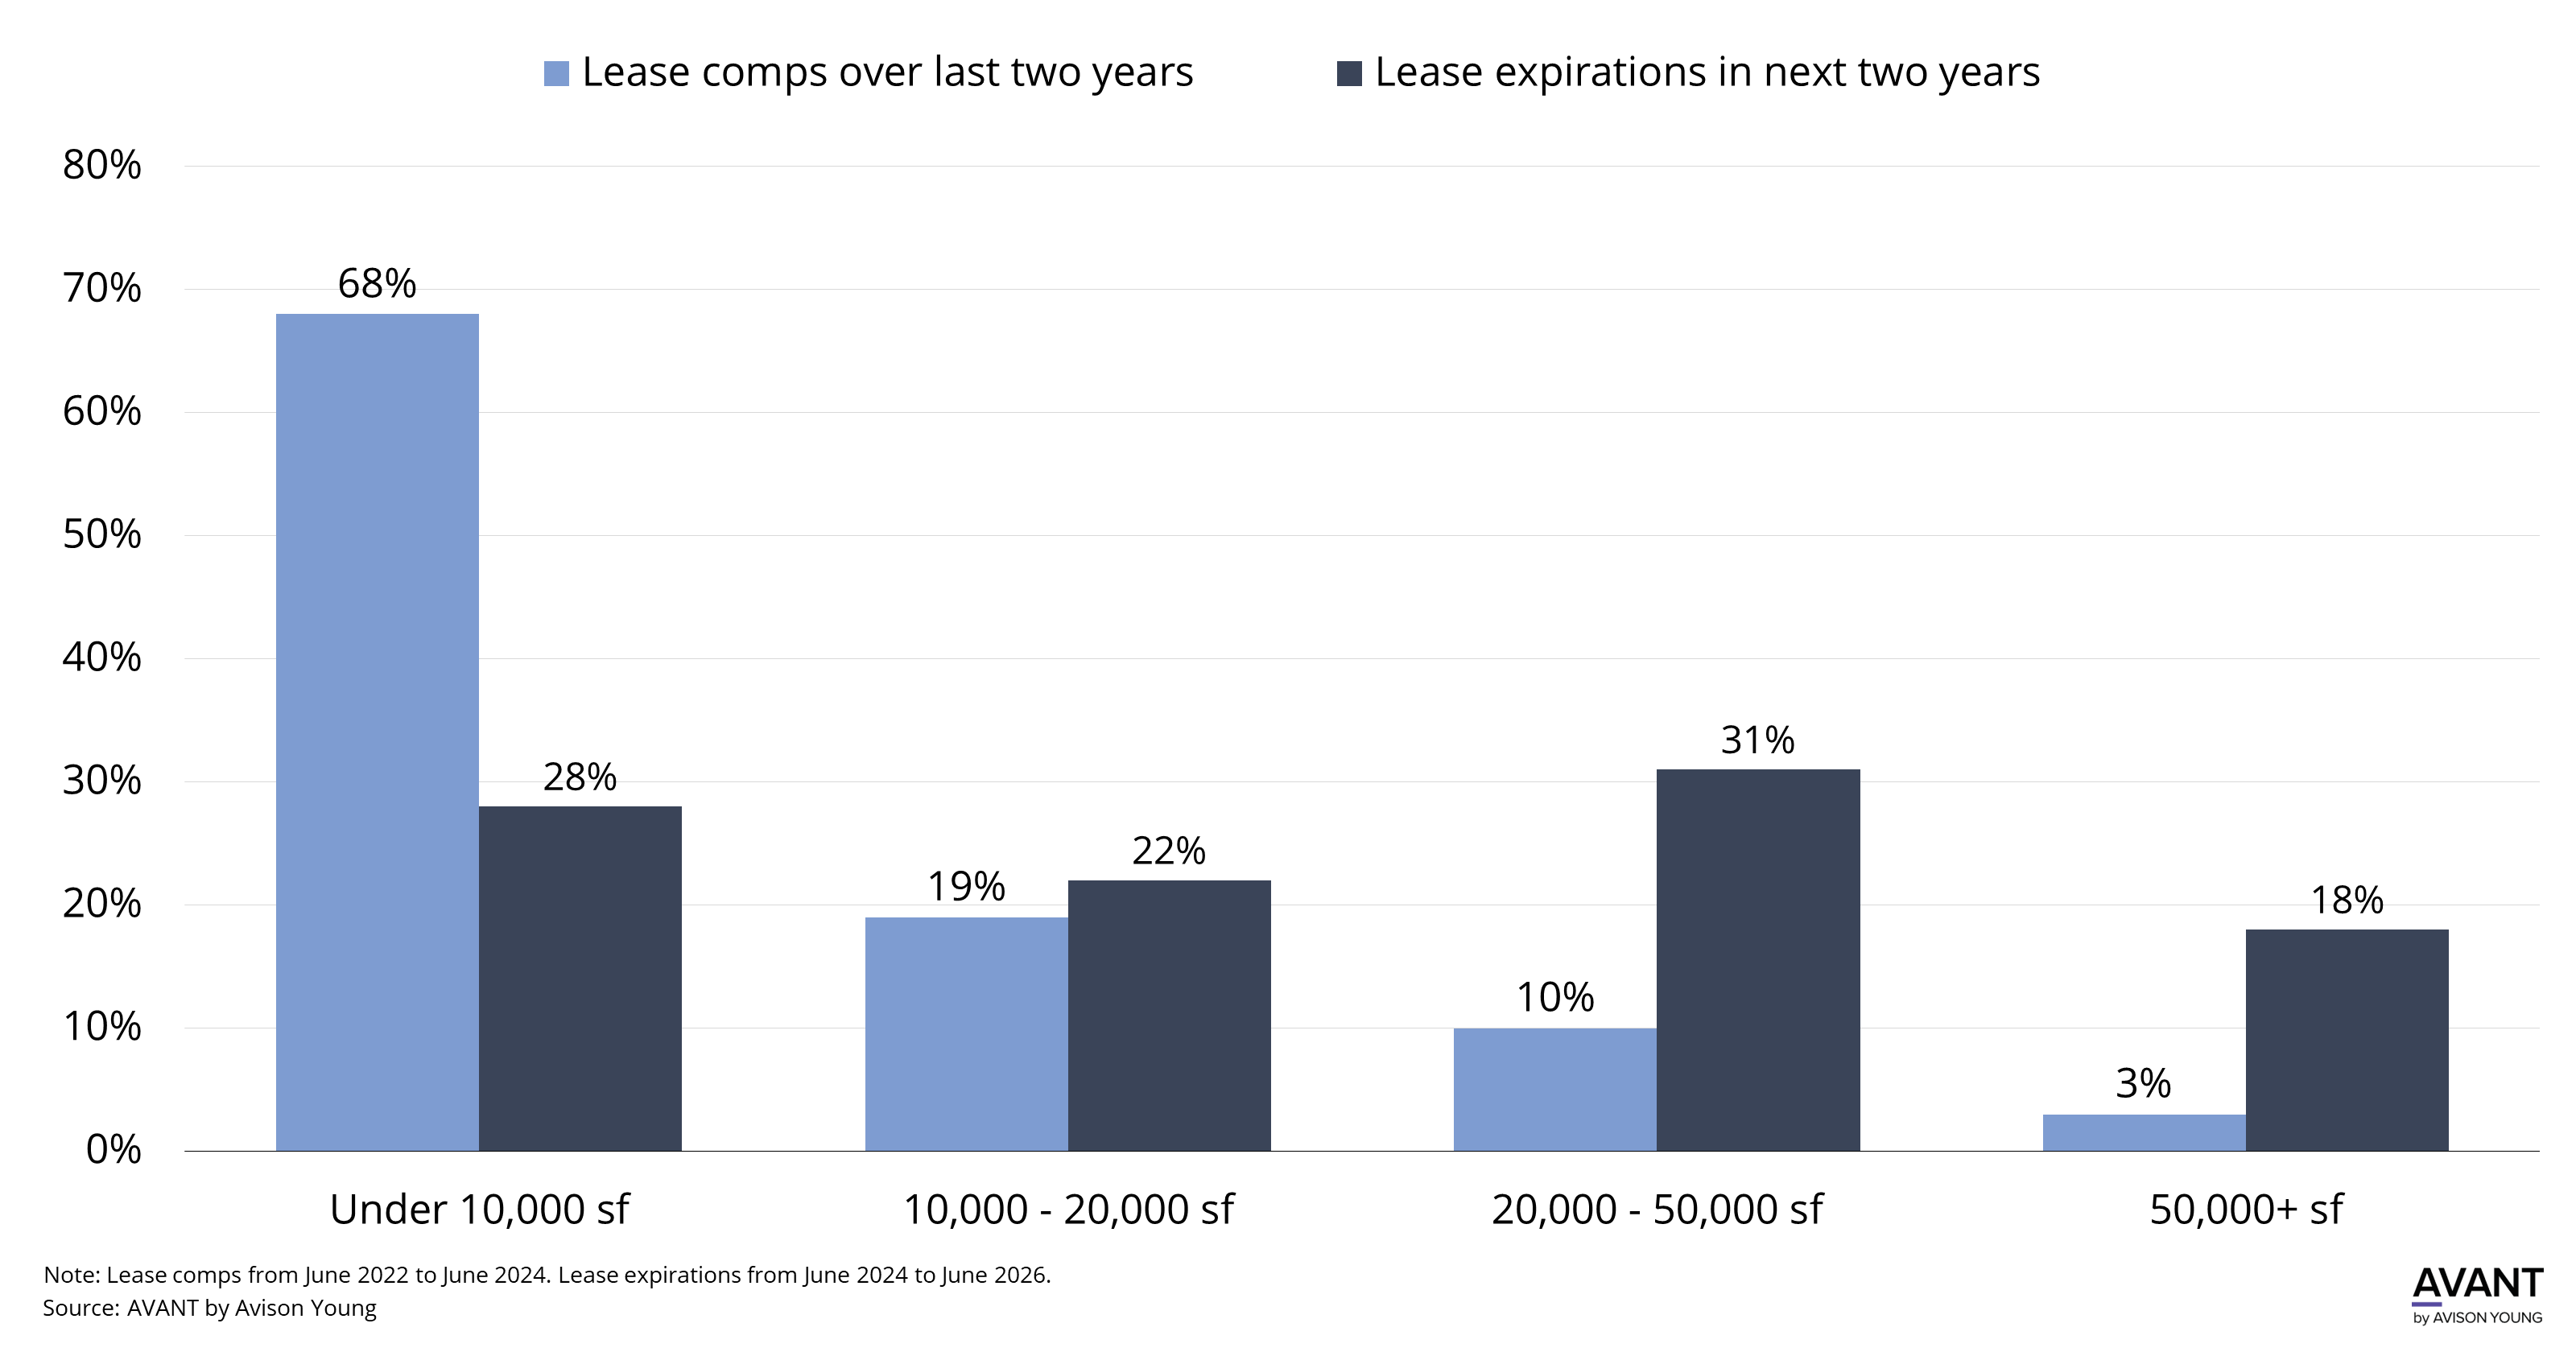 Office lease comps in the last two years compared with lease expirations in the next two years ranging from under 10,000 square feet to 50,000 or more square feet in Miami